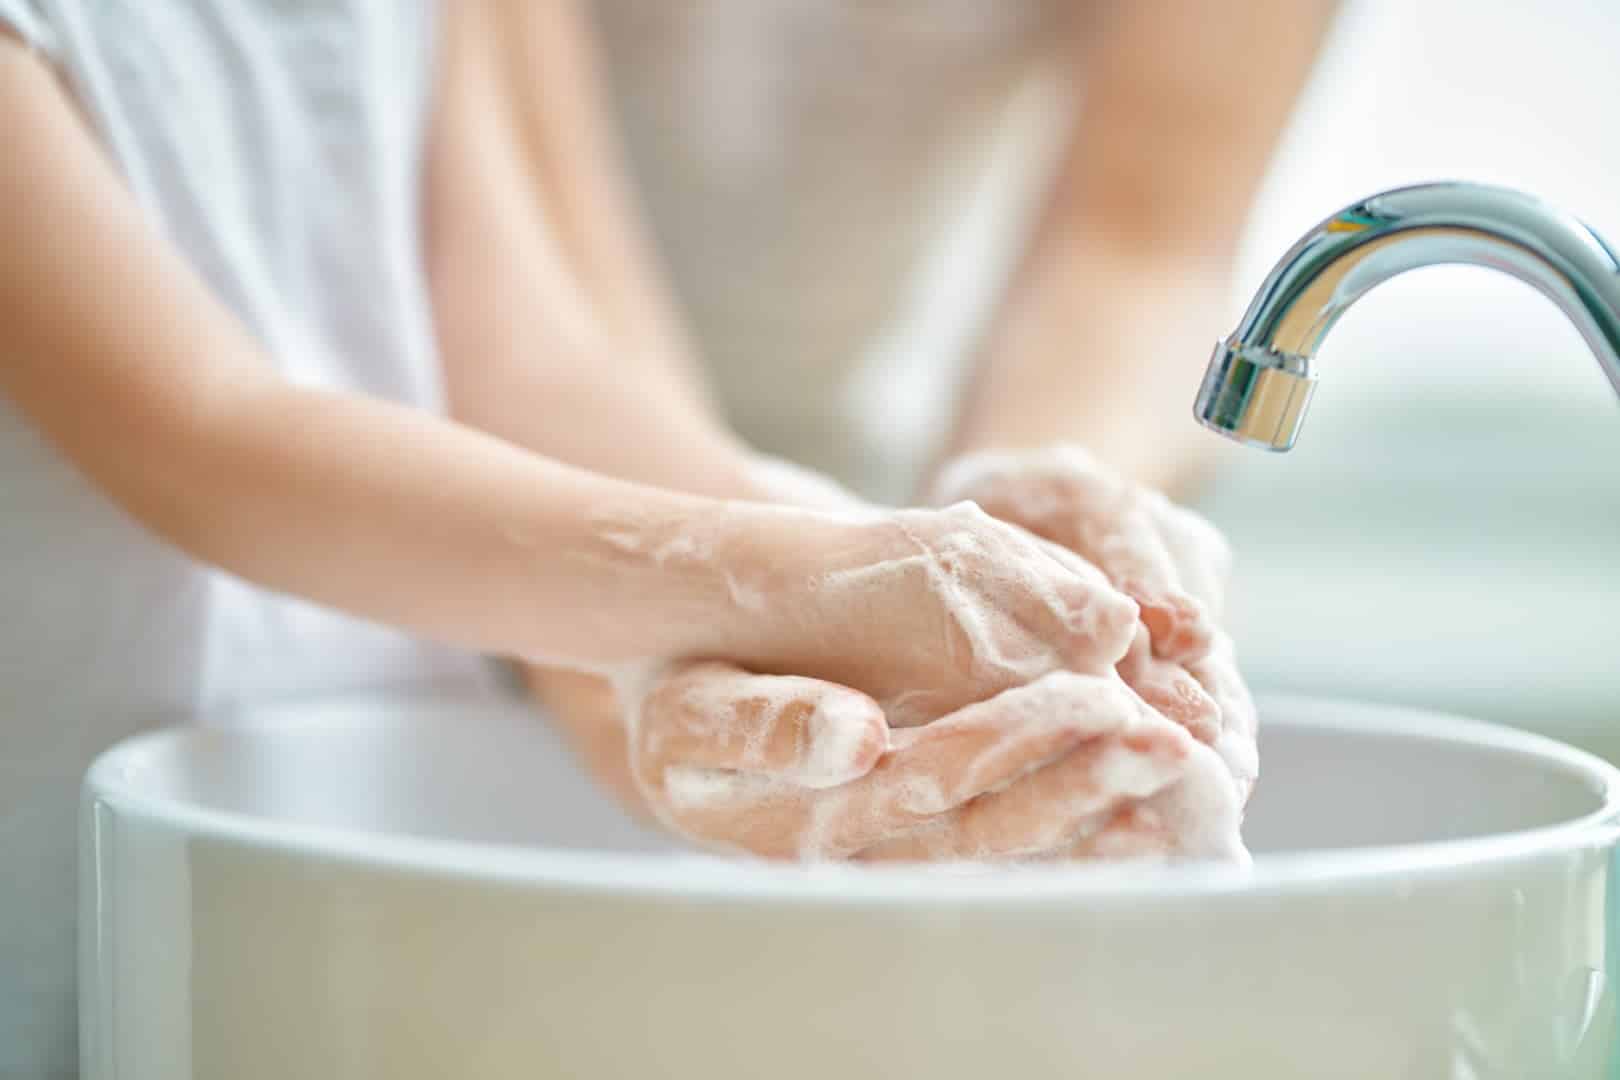 Getting your kids to wash their hands